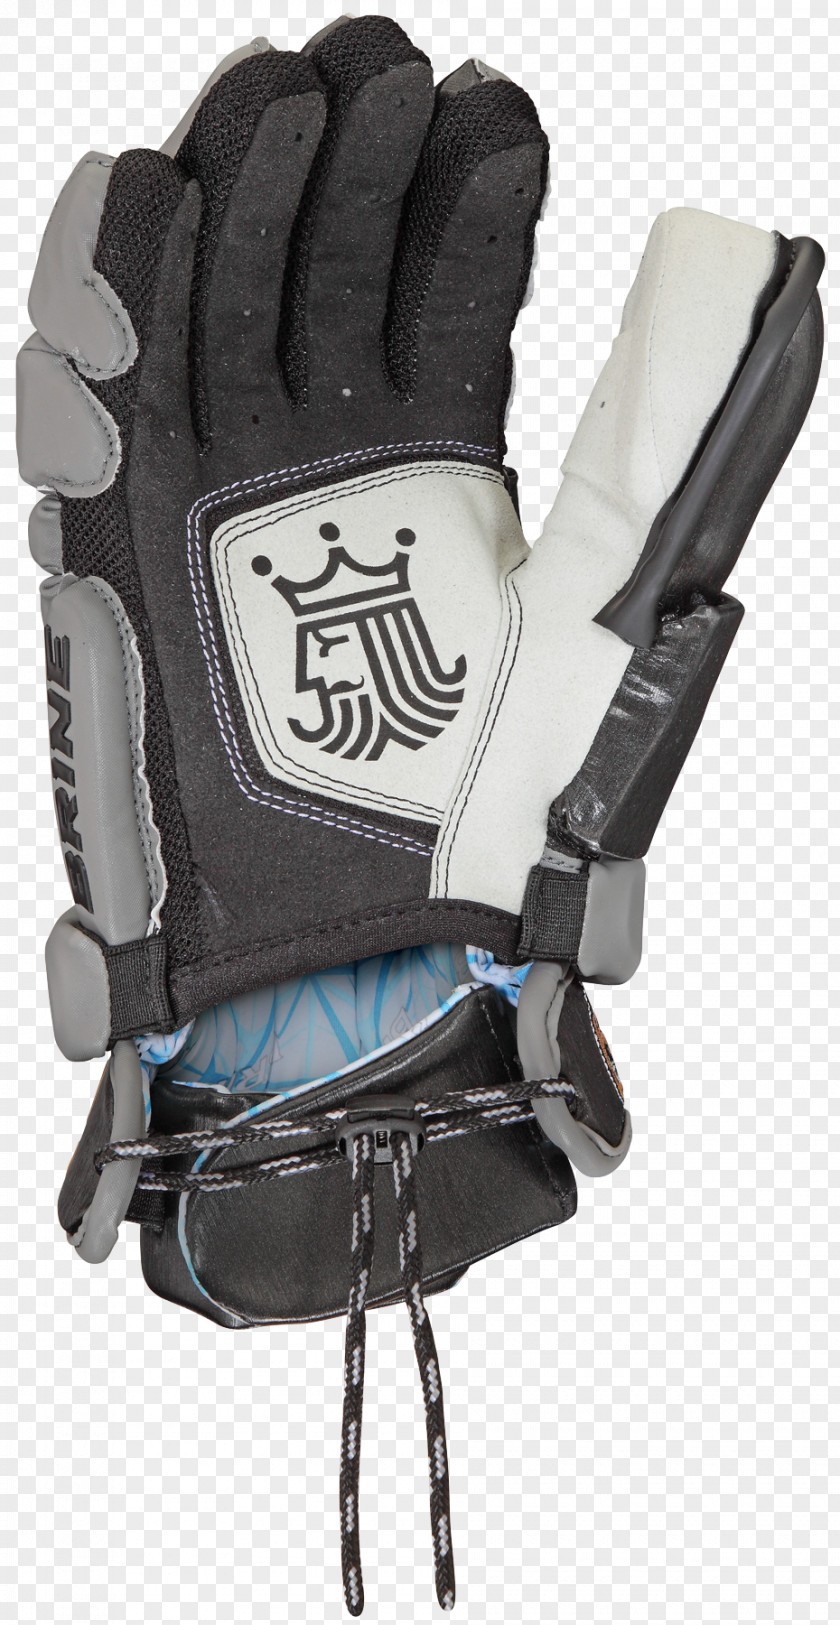 Lacrosse Protective Gear In Sports Personal Equipment Glove Sporting Goods PNG